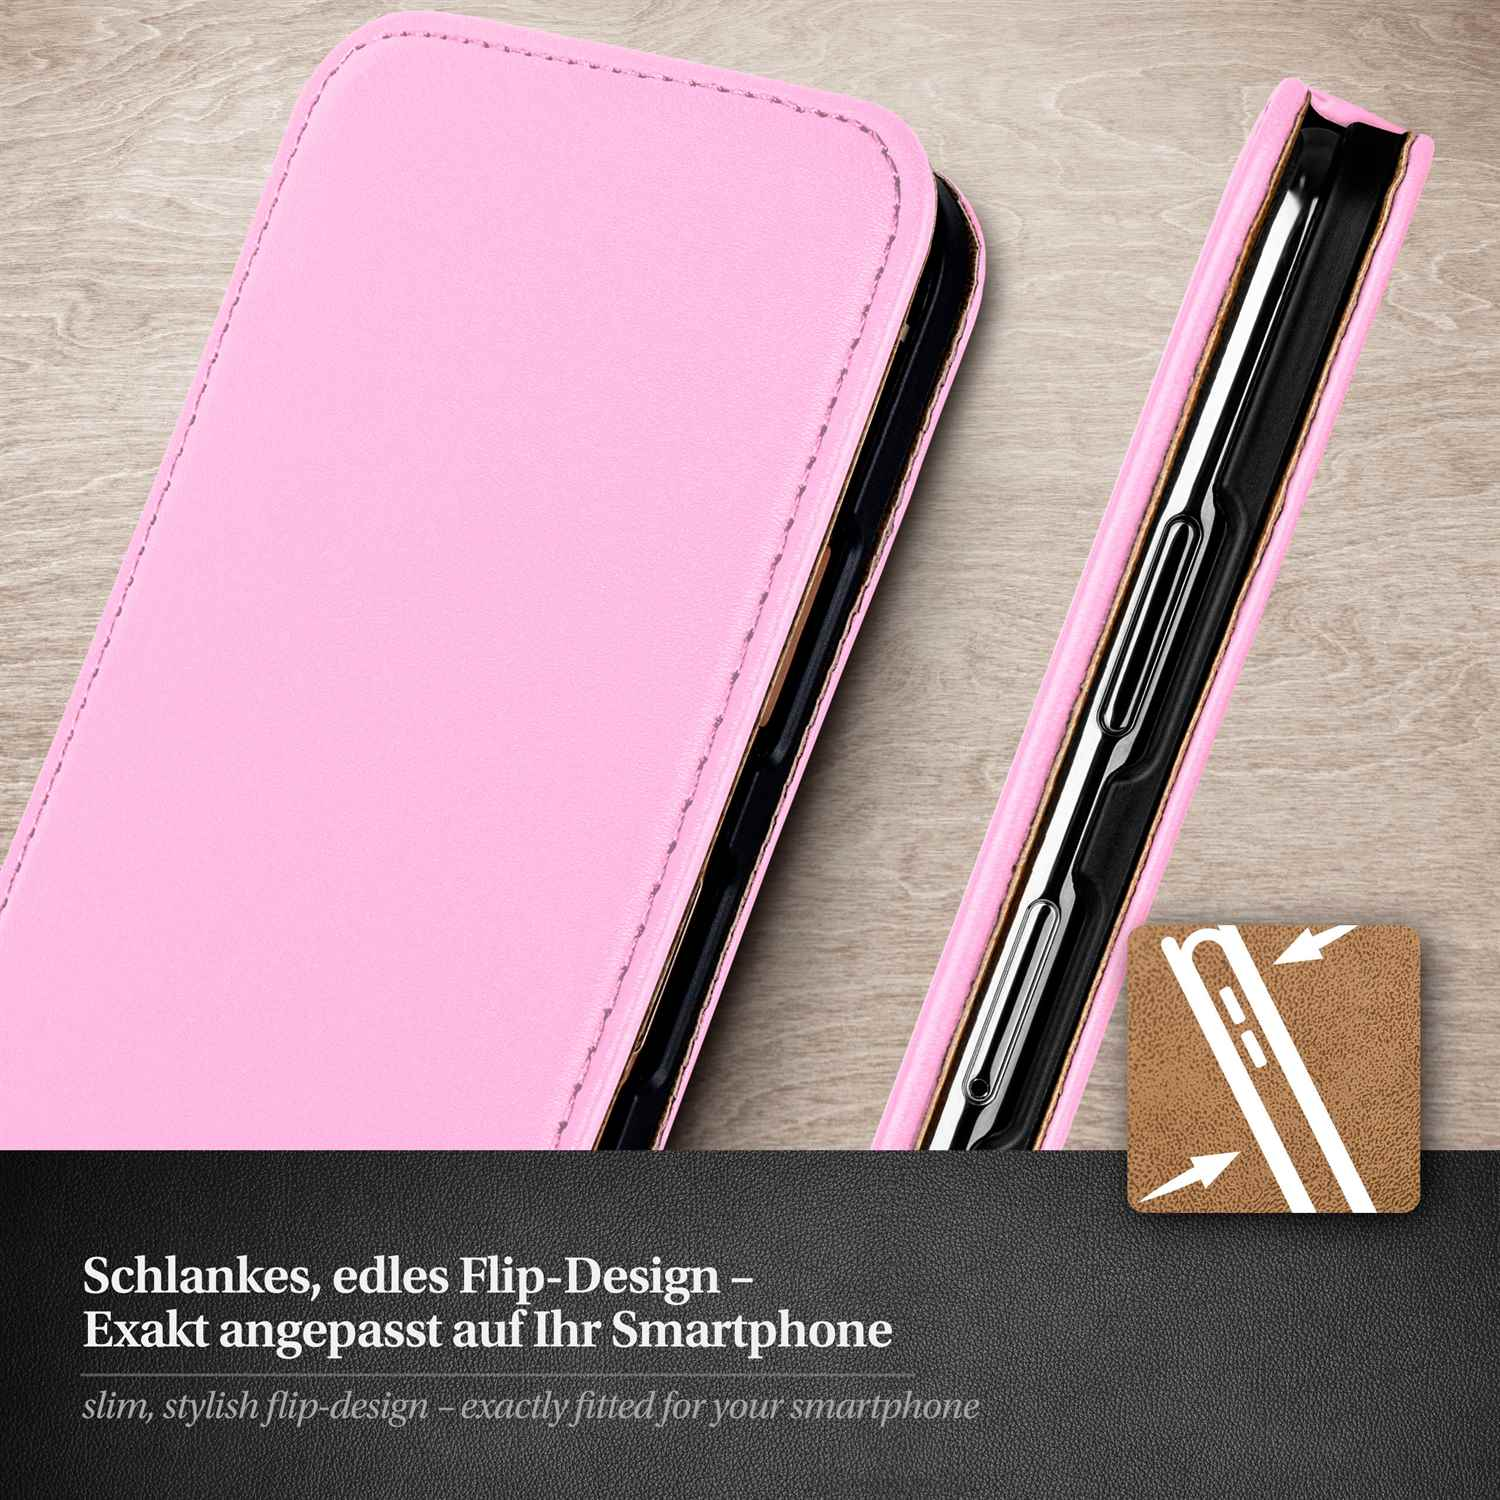 Z, Xperia Icy-Pink MOEX Case, Flip Flip Sony, Cover,